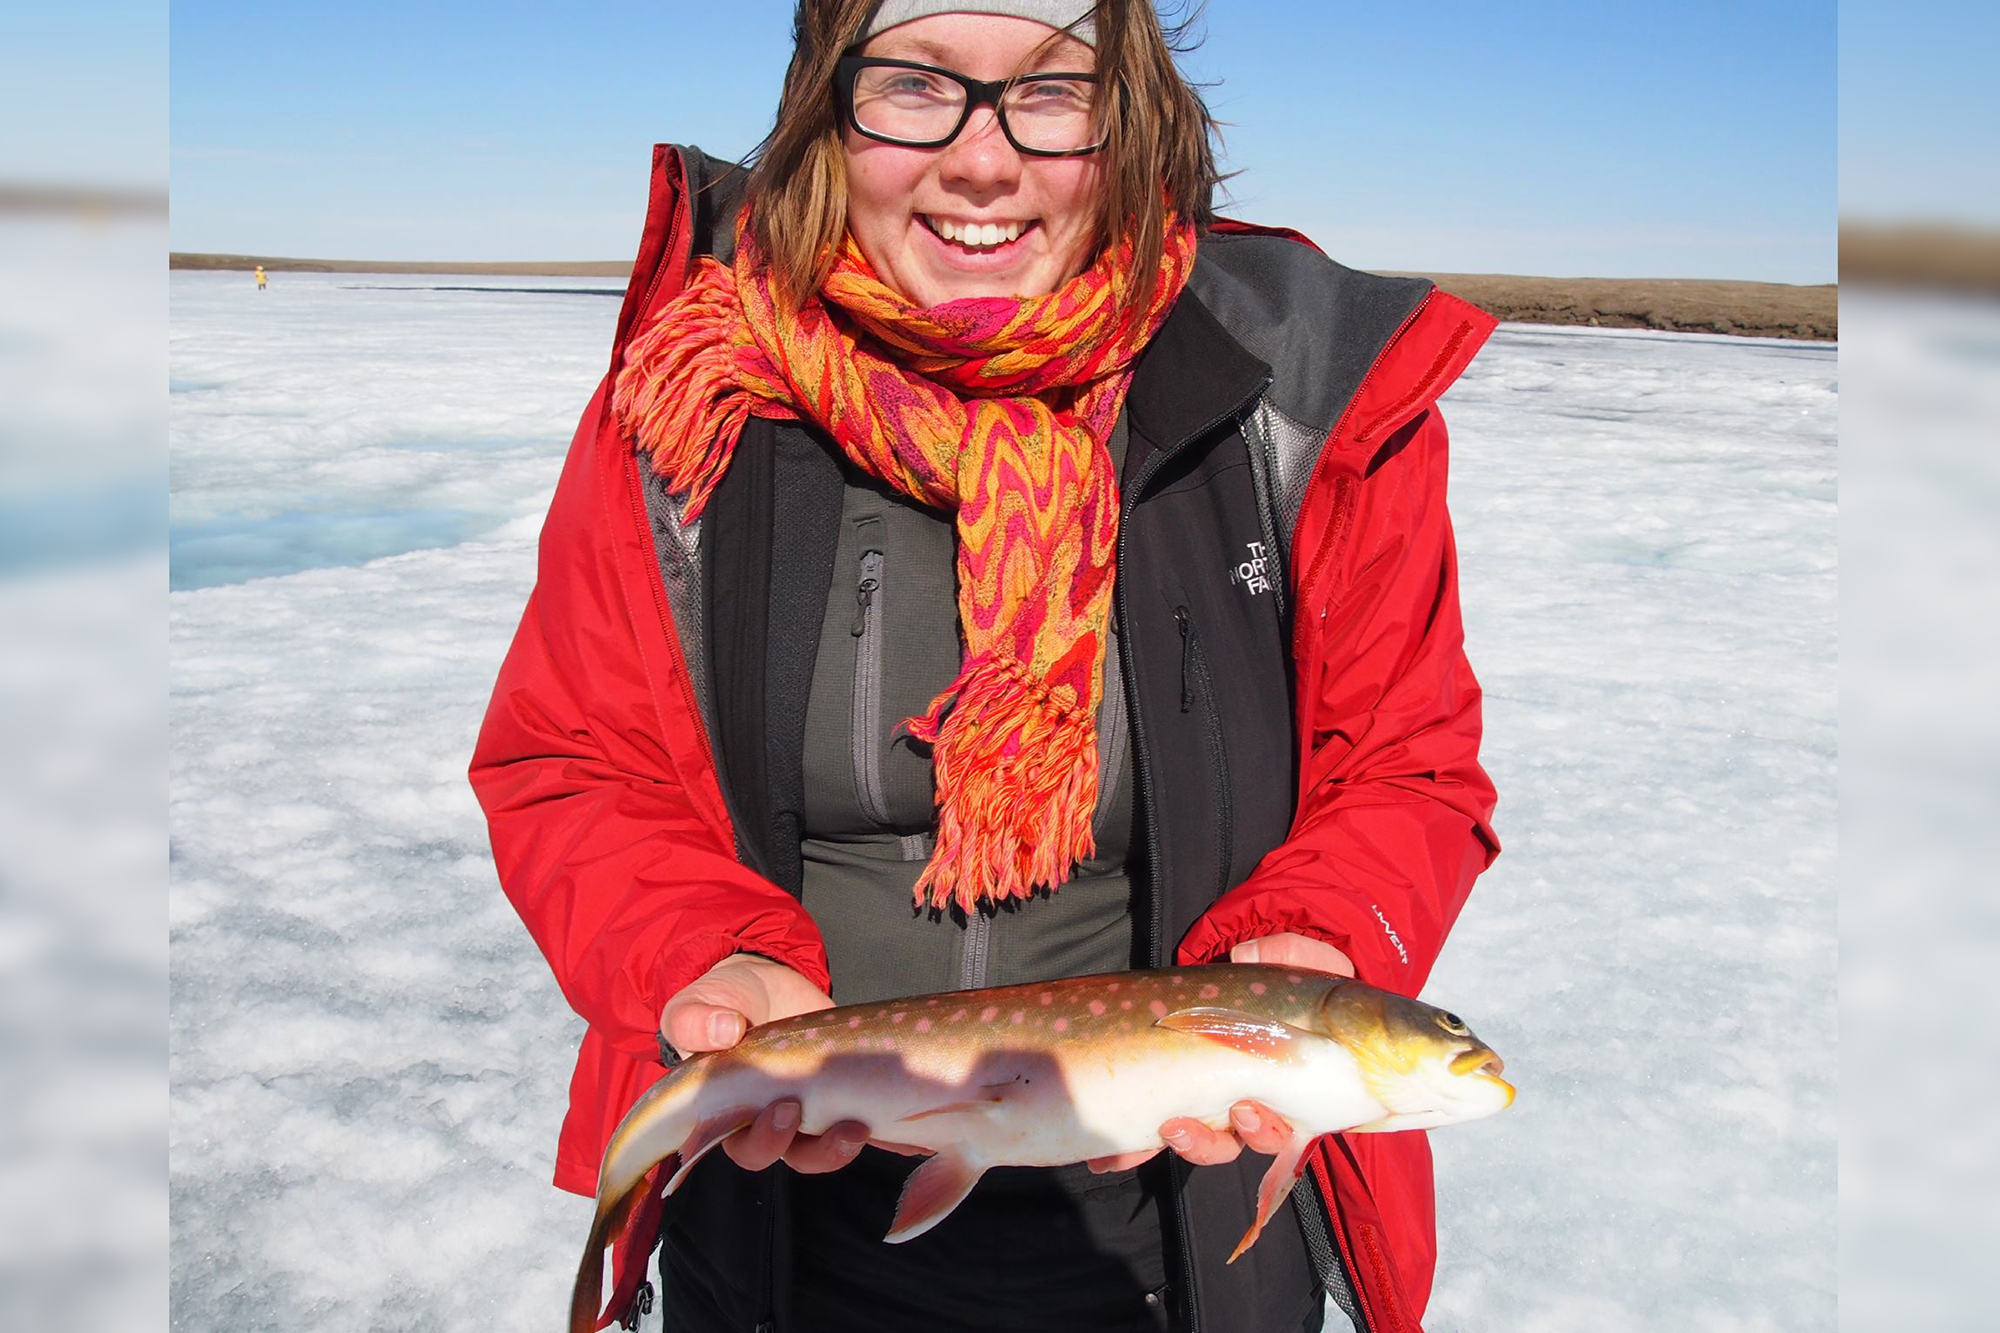 Zoe Todd standing in a winter landscape, wearing cold weather clothes, smiling and holding a fish